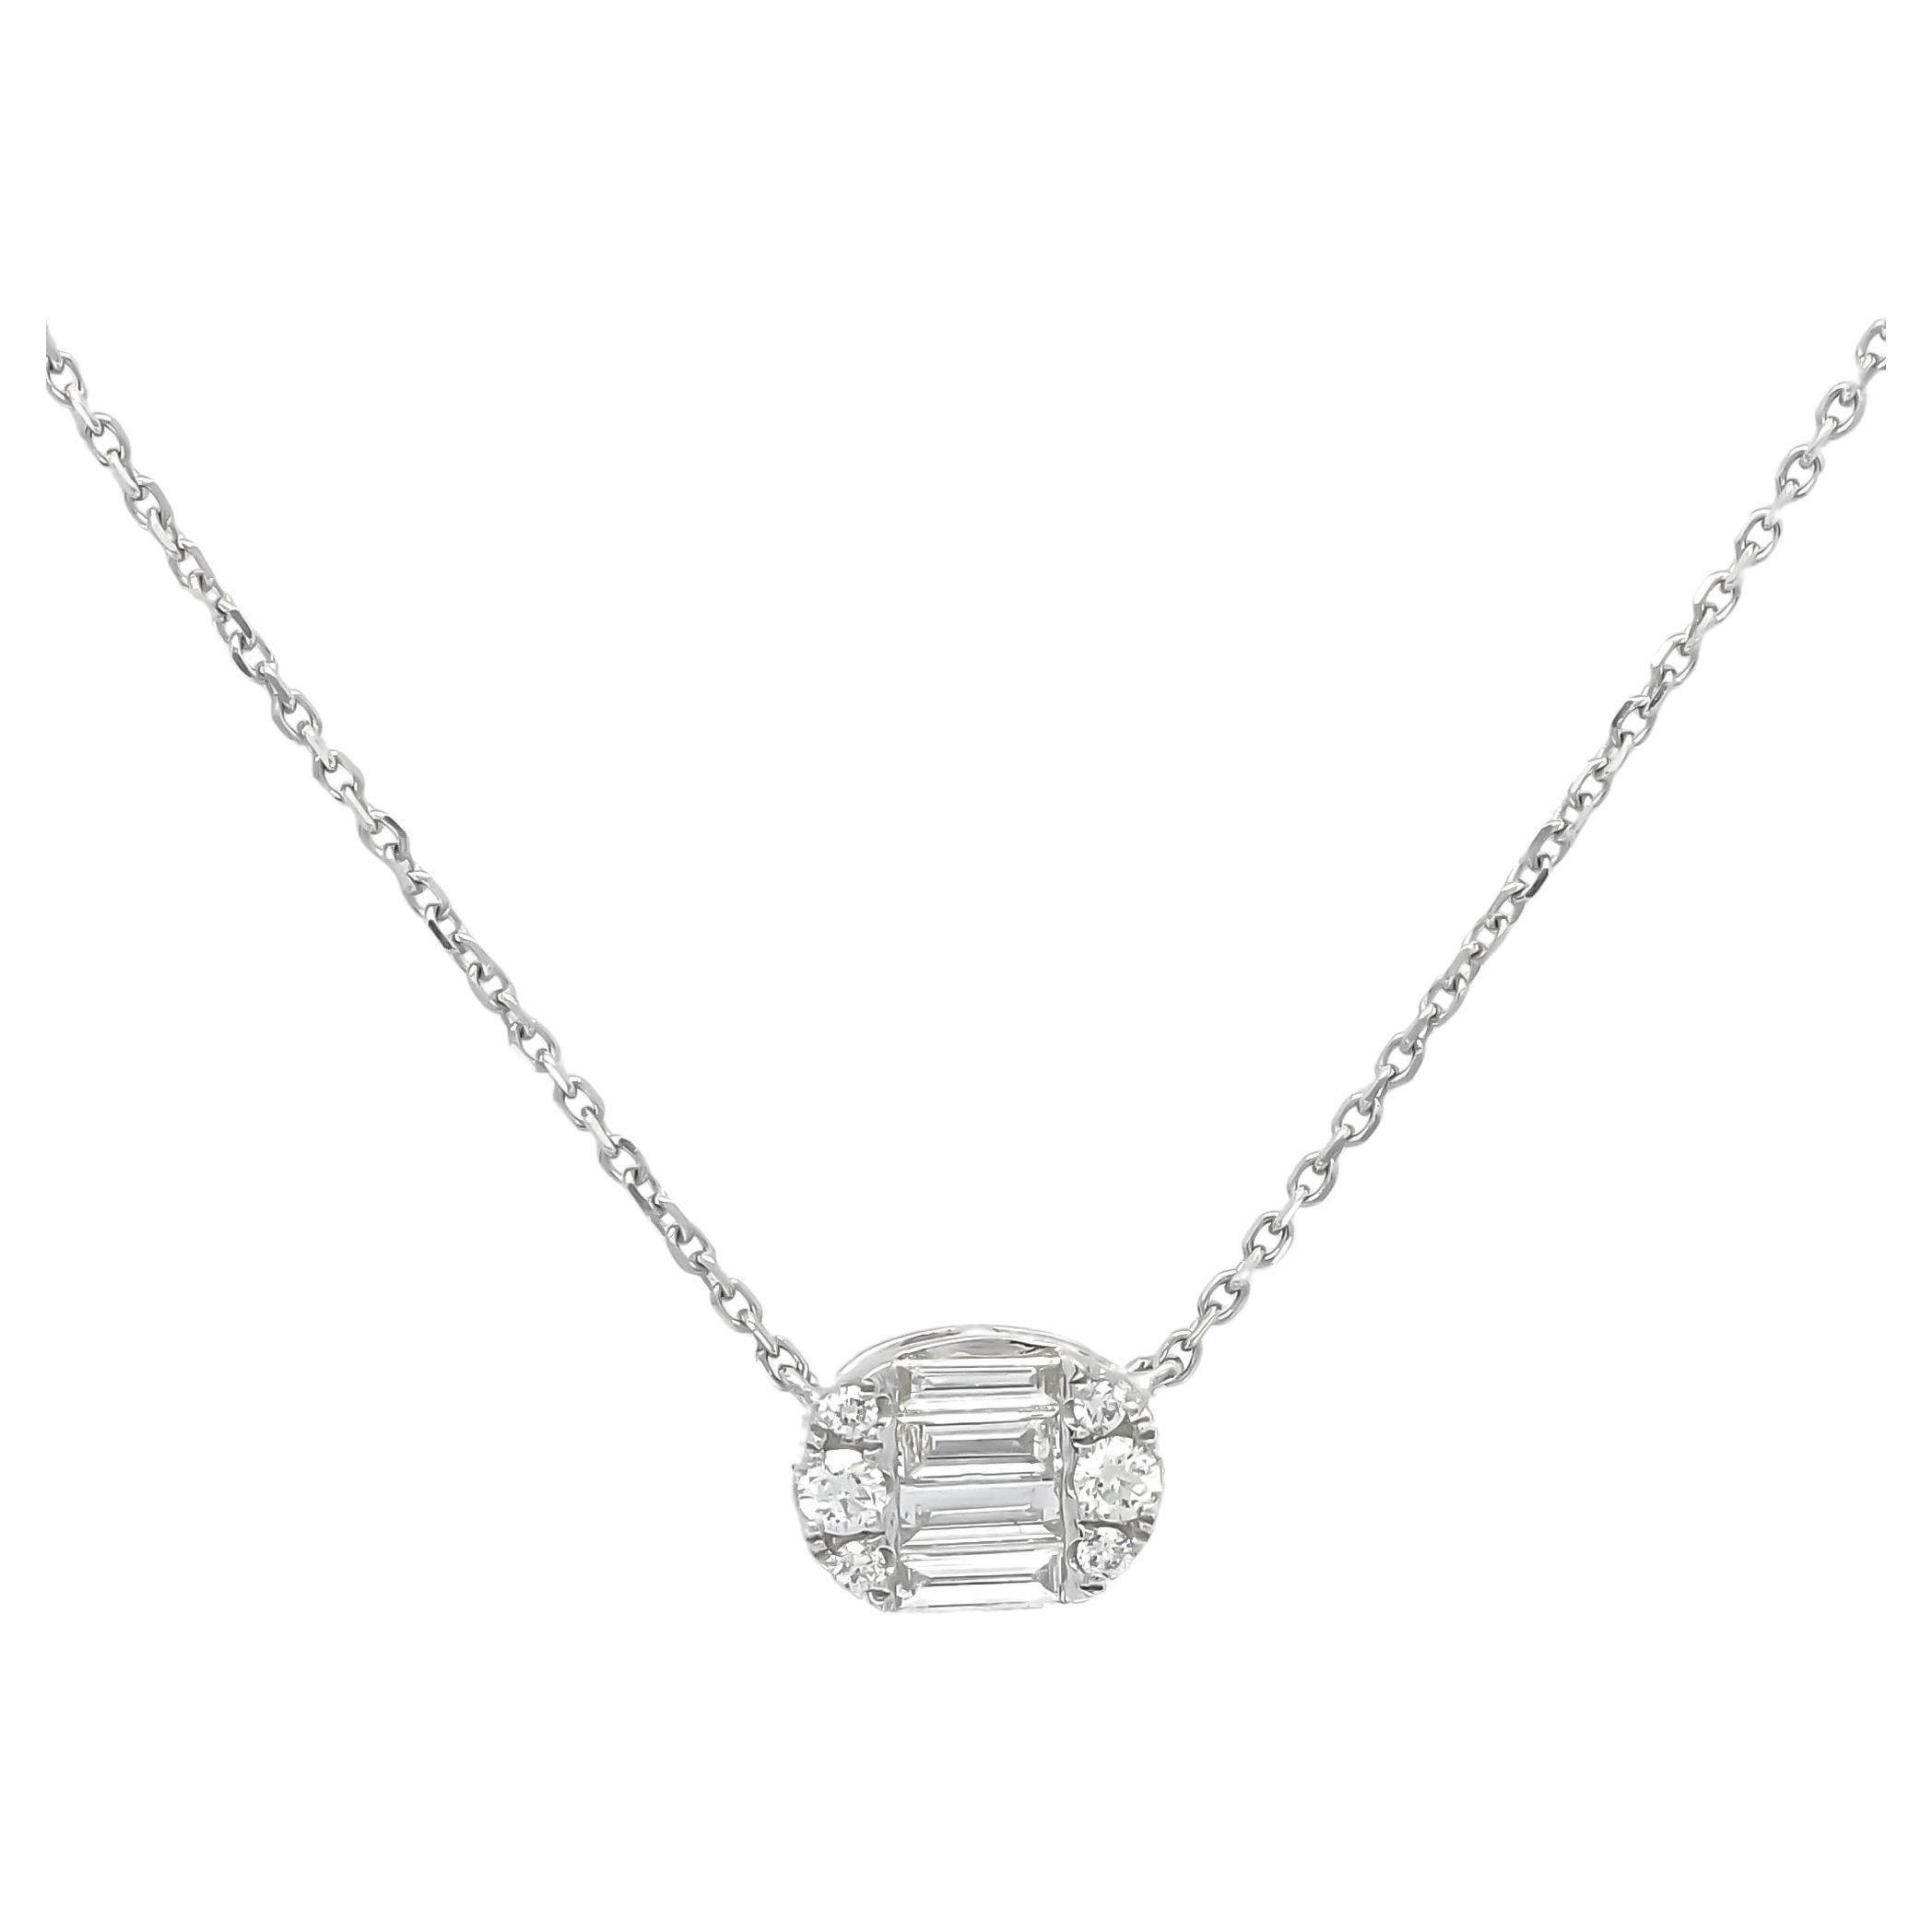 Natural Diamond Pendant 0.40 cts 18KT White Gold Oval Shape Chain Necklace   For Sale